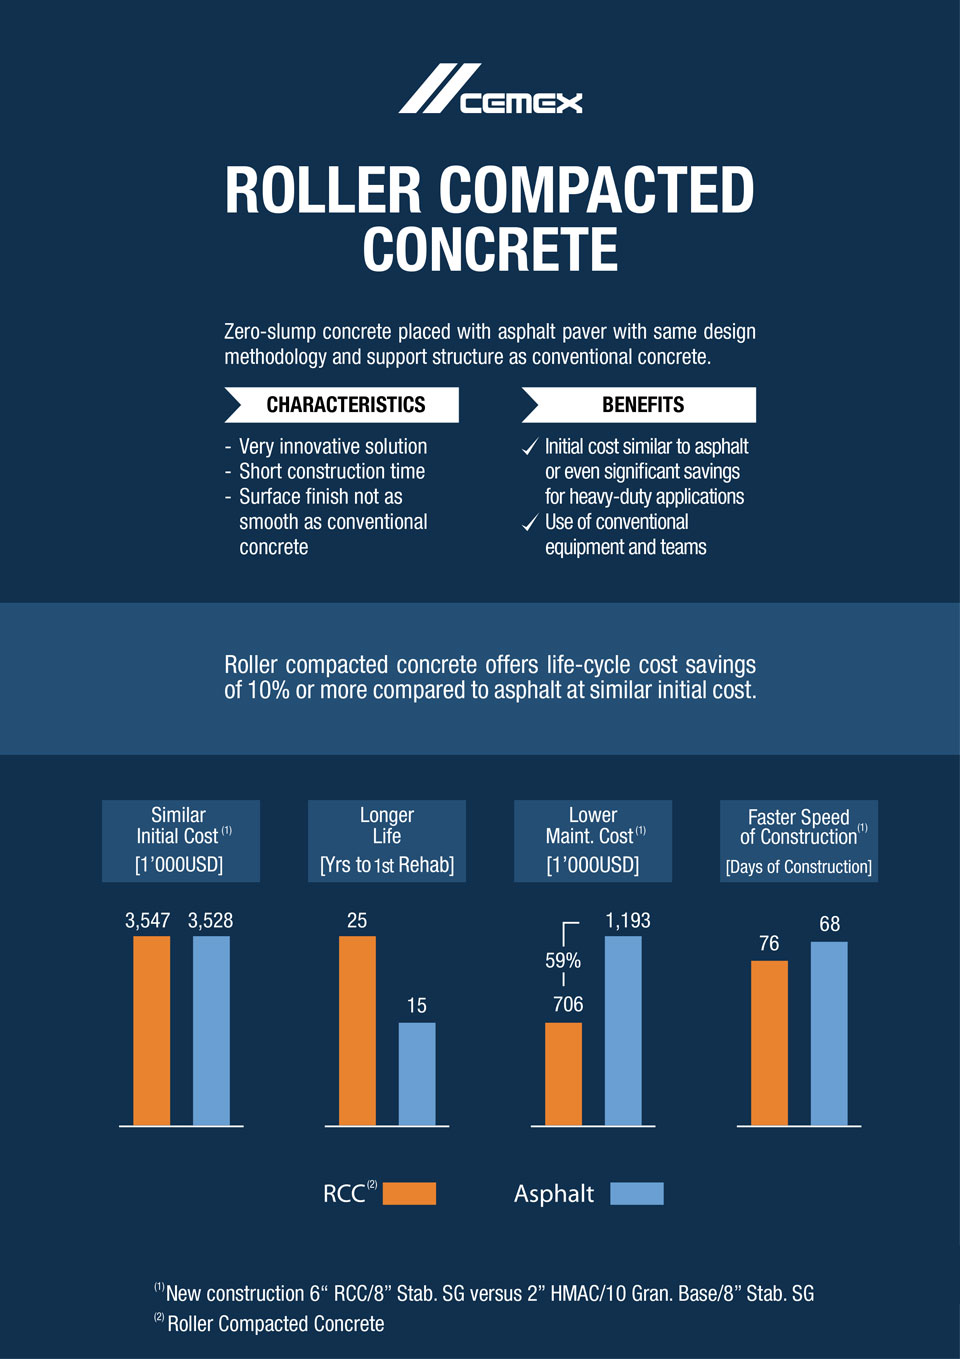 the image shows characteristics and benefits of roller compacted concrete